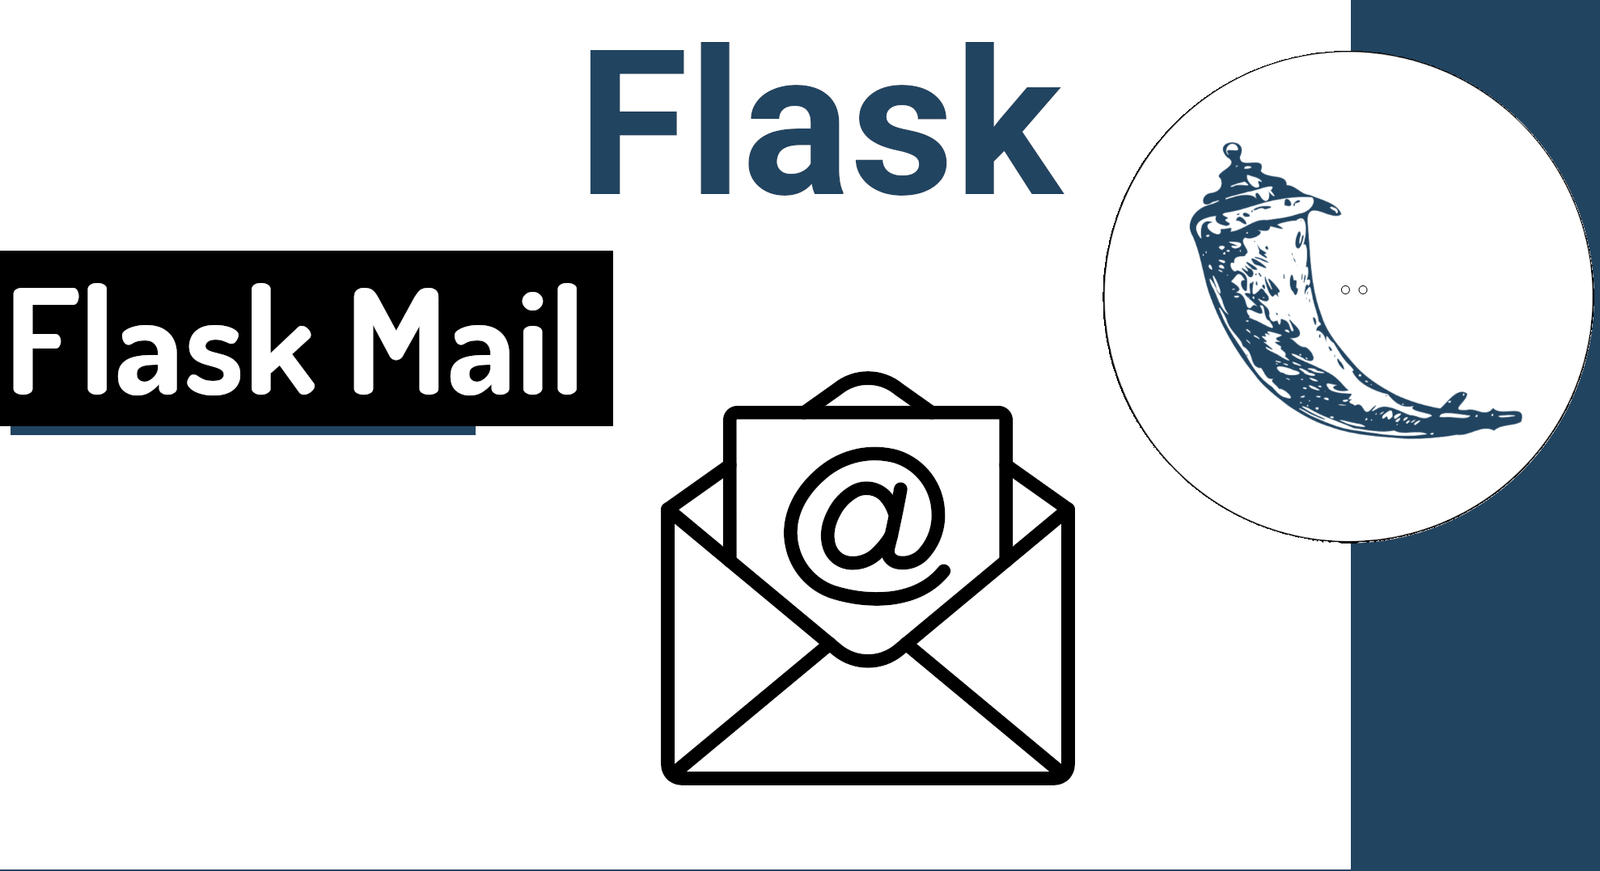 Flask Mail to send emails